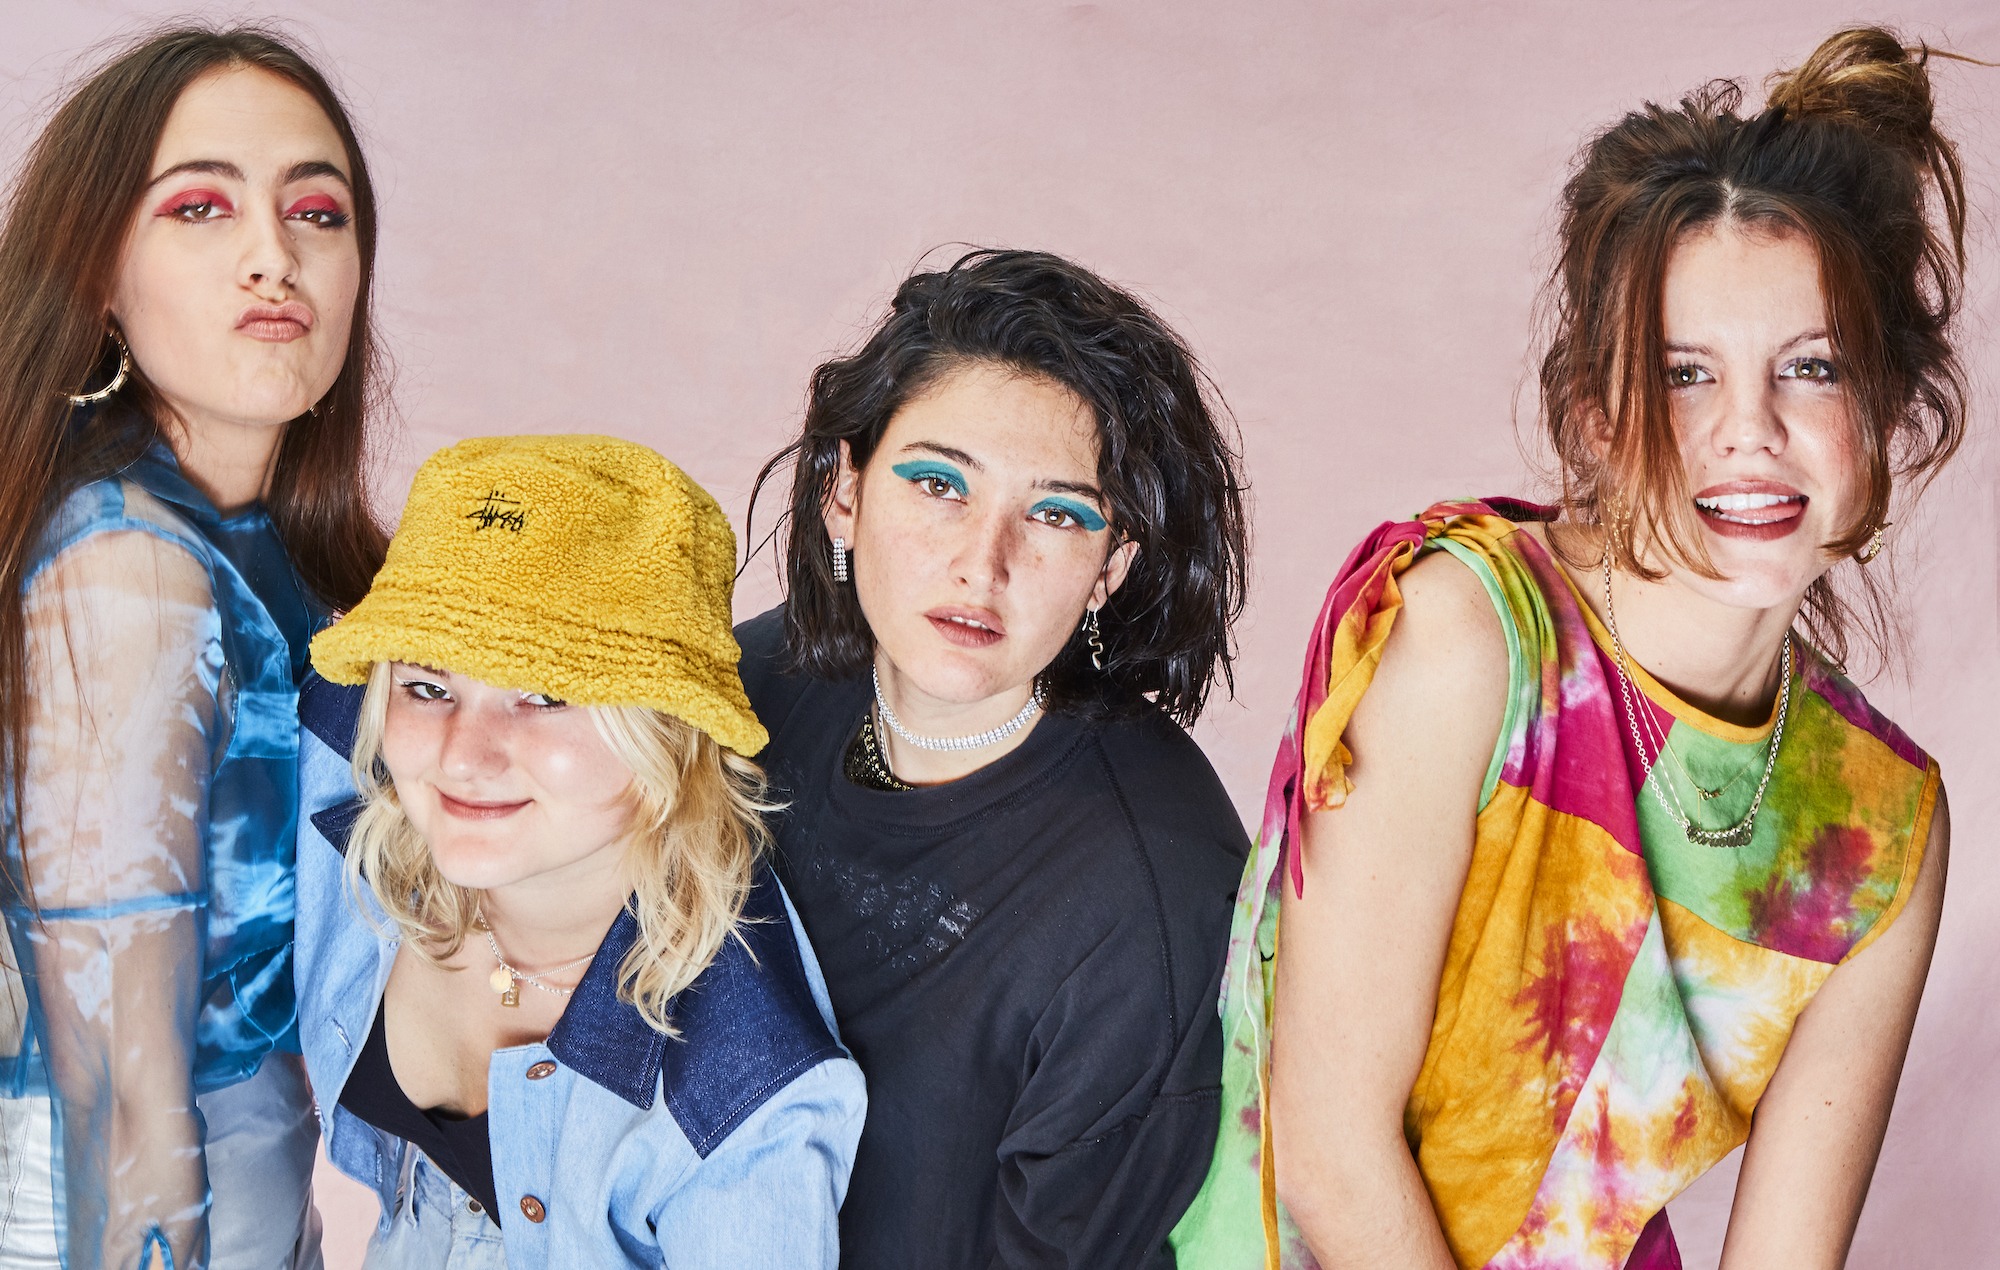 Hinds: “A big reason for girls not starting bands is that they’re made to feel stupid”